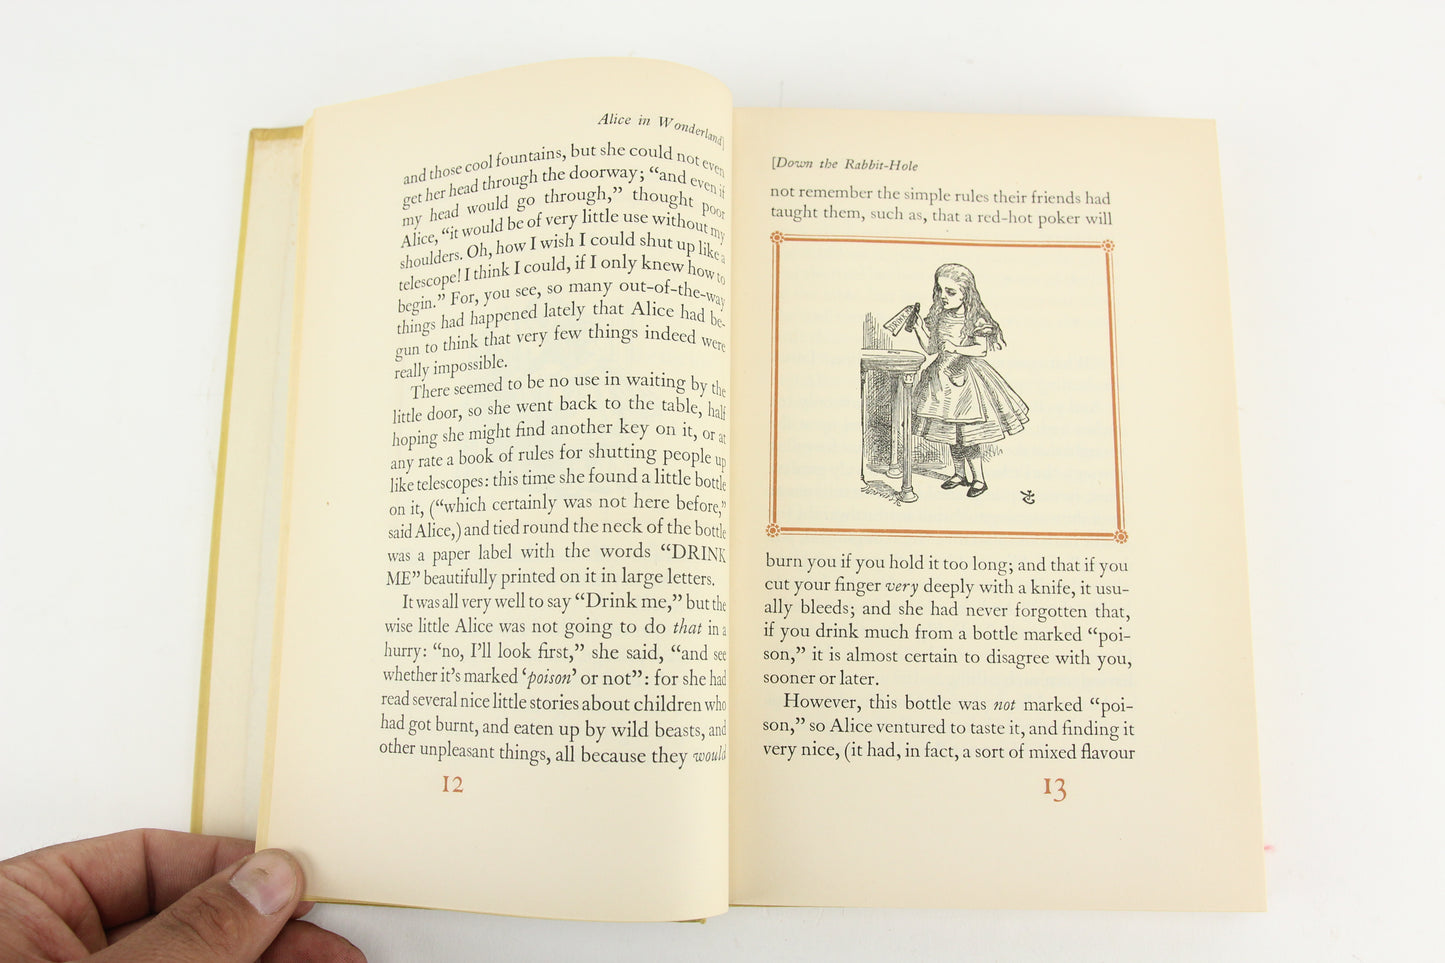 Alice's Adventures in Wonderland & Through the Looking Glass by Lewis Carroll, Copyright 1941